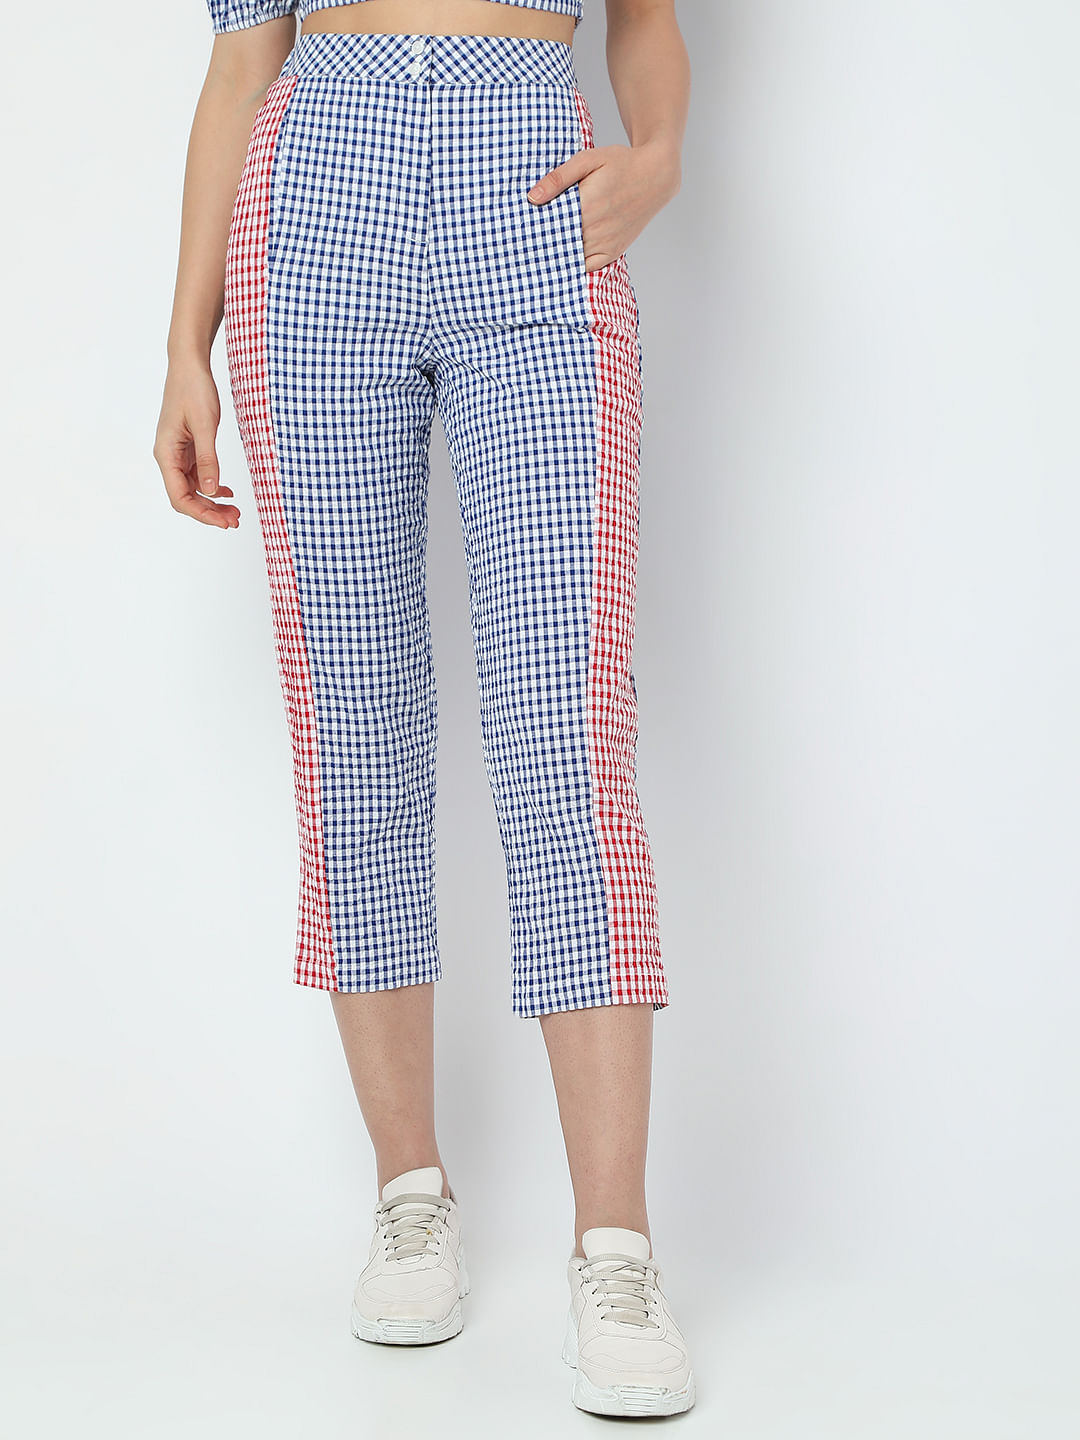 Blue Check Pattern Cotton Canvas Full-Length Pants | Intimissimi